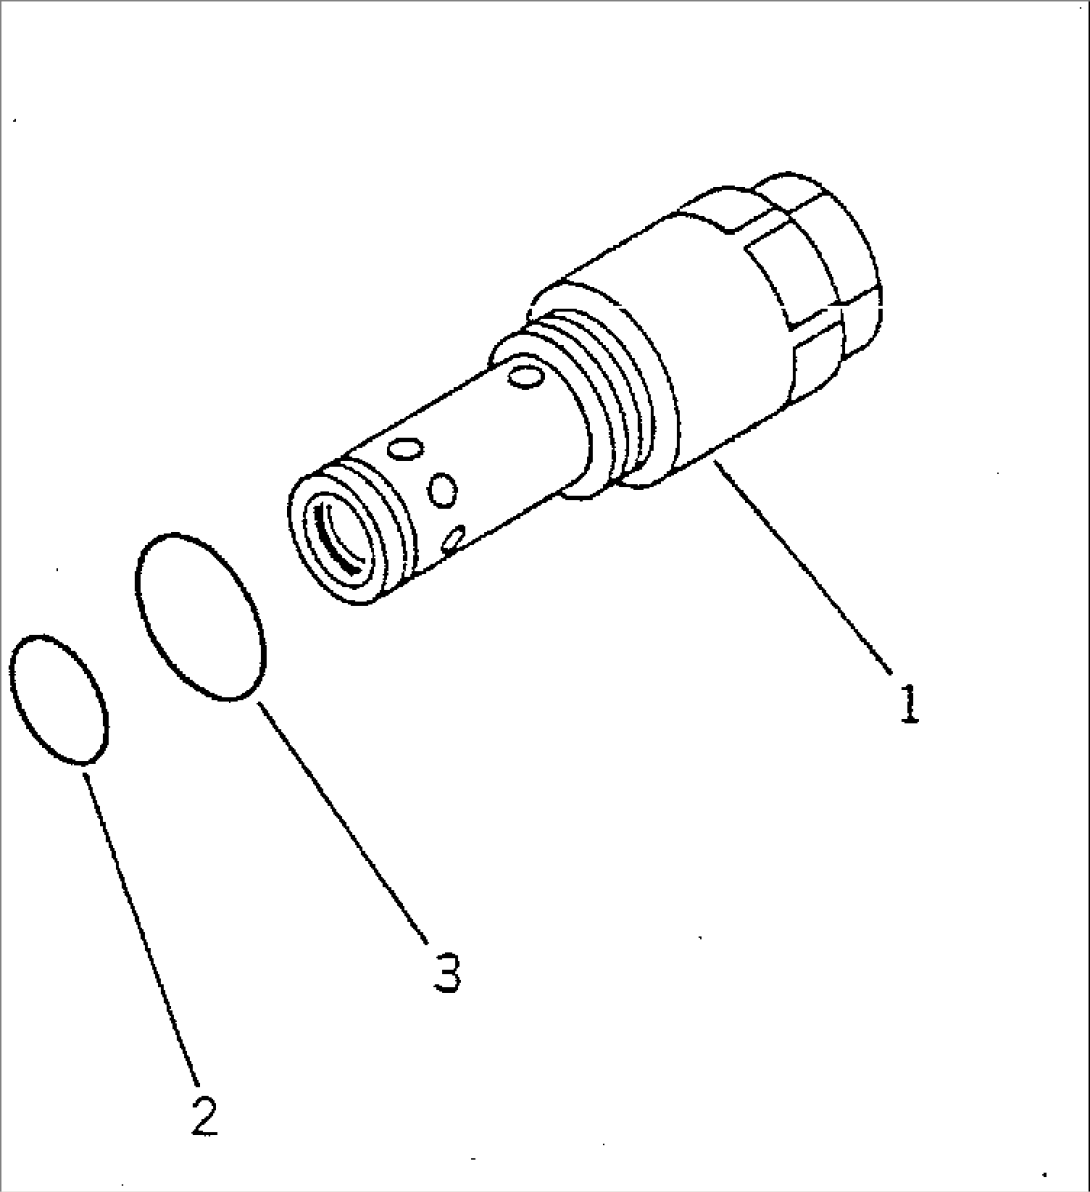 CHARGE SAFETY VALVE